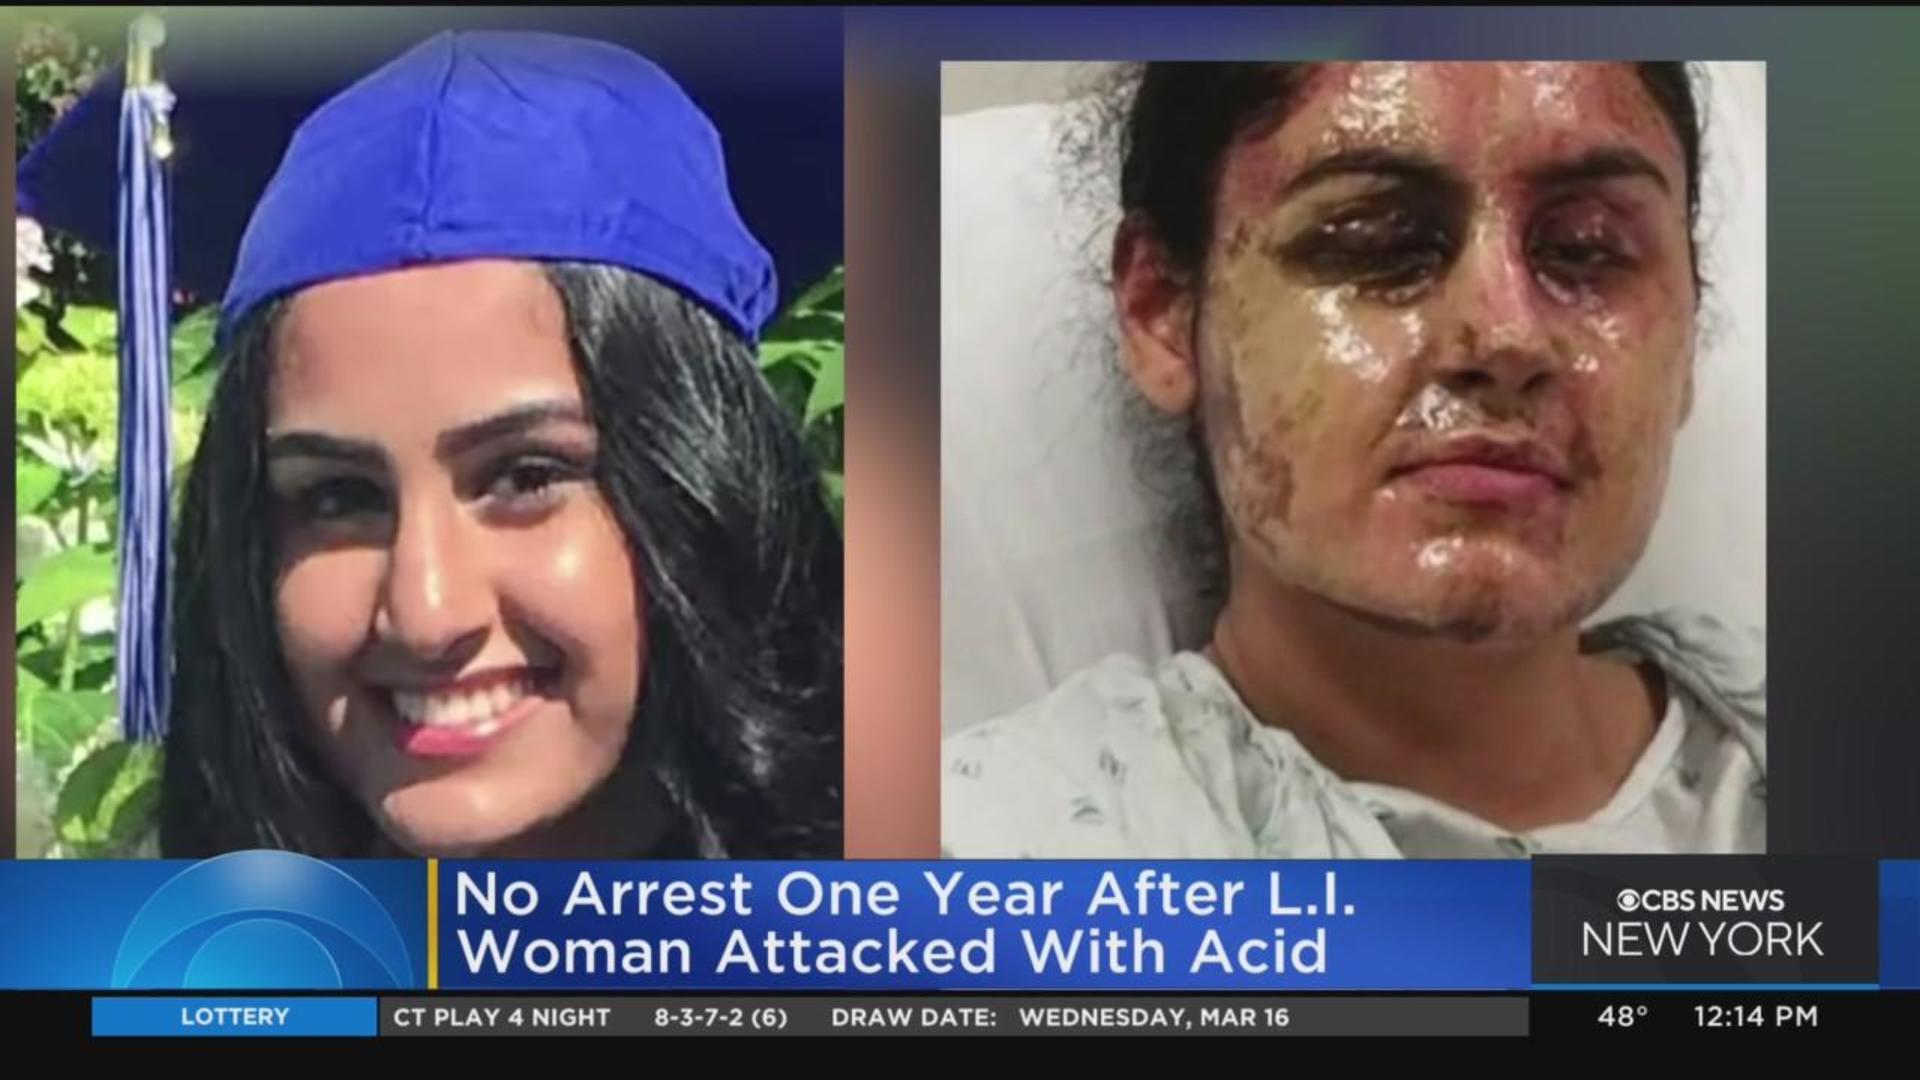 California Woman, Former Beauty Queen, Survives Acid Attack and Works to  Raise Awareness - California Newswire